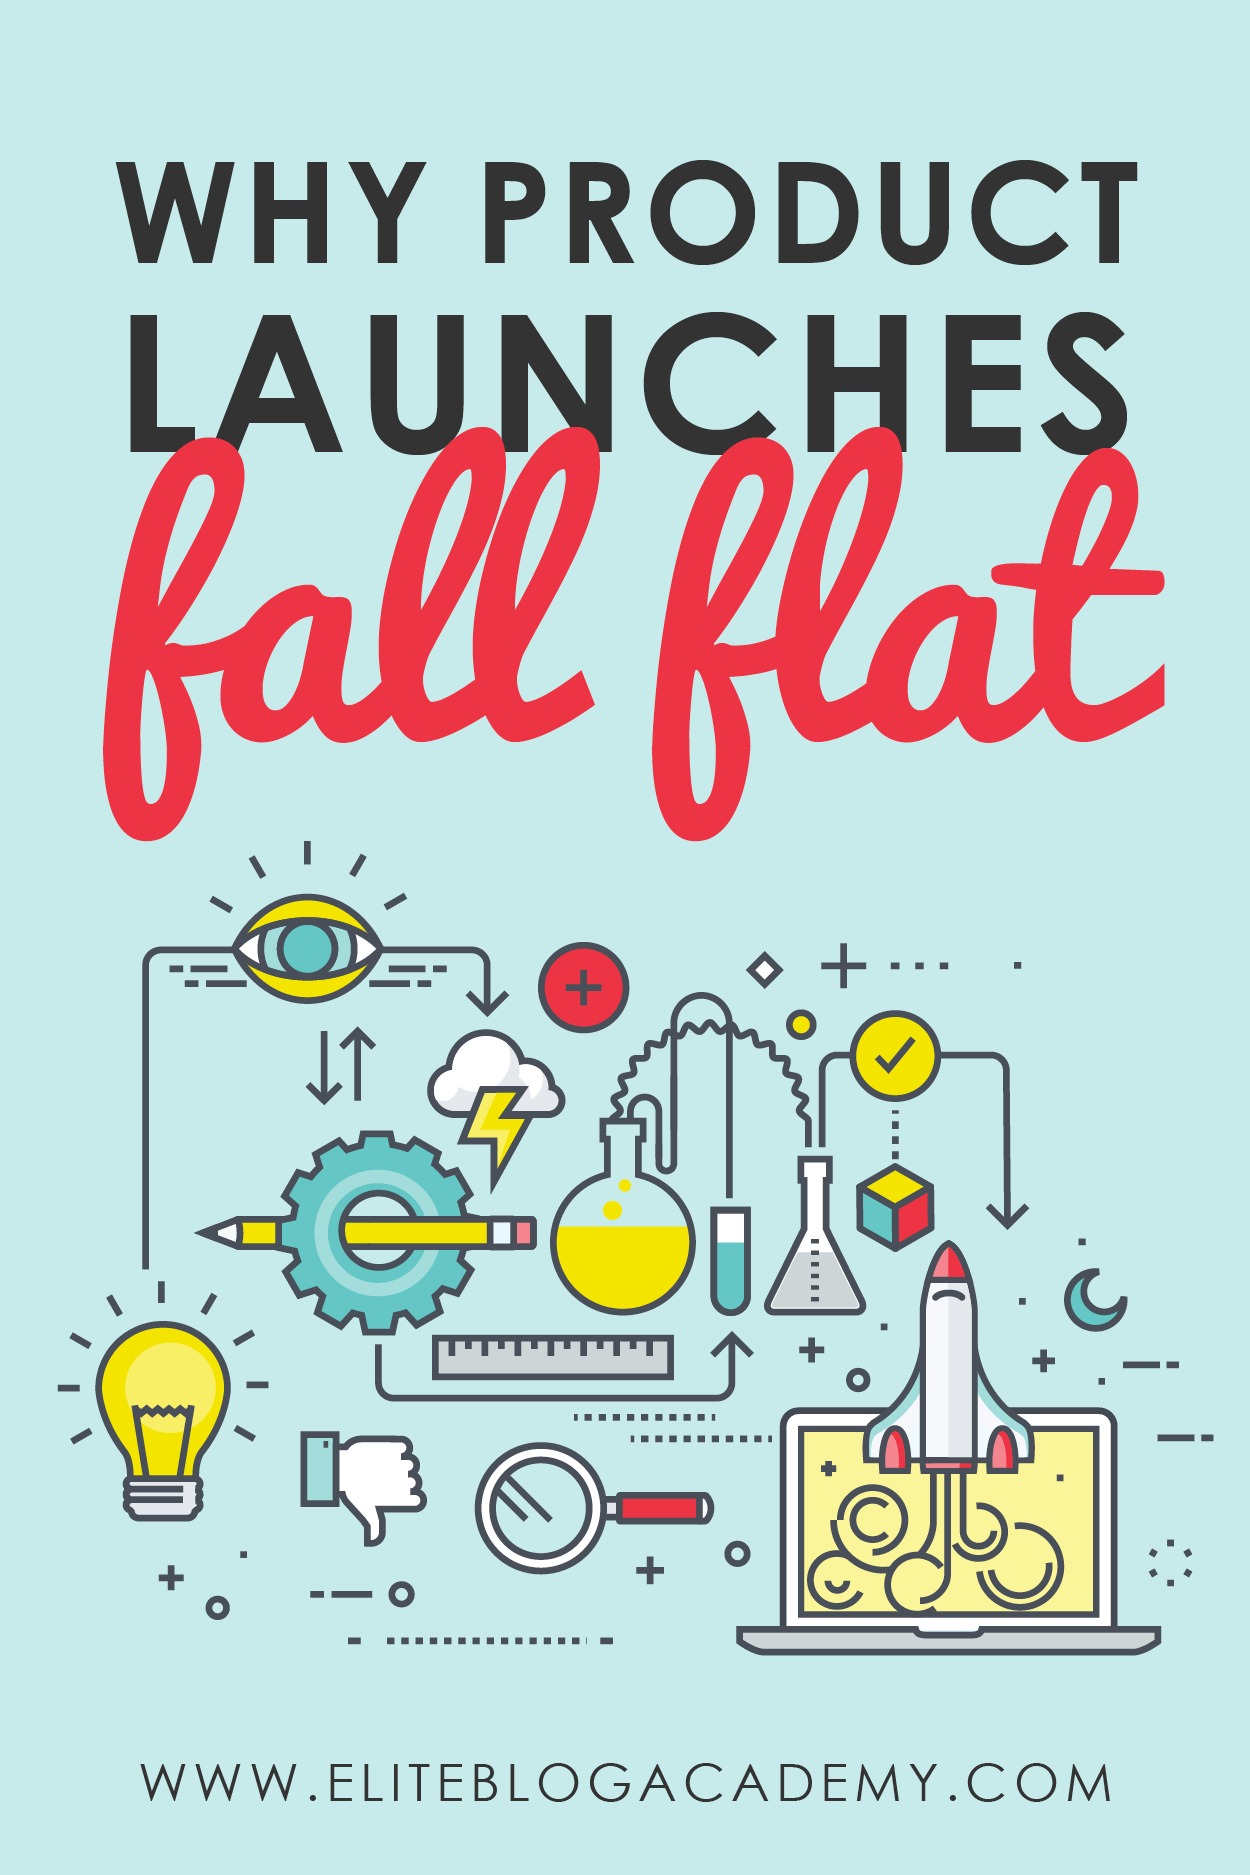 Worried your blog’s first product launch will fail? Launching any new product can be scary, but don’t let it stop you — you can actually learn from others’ mistakes! Check out these 6 reasons product launches fail (and how to avoid them).